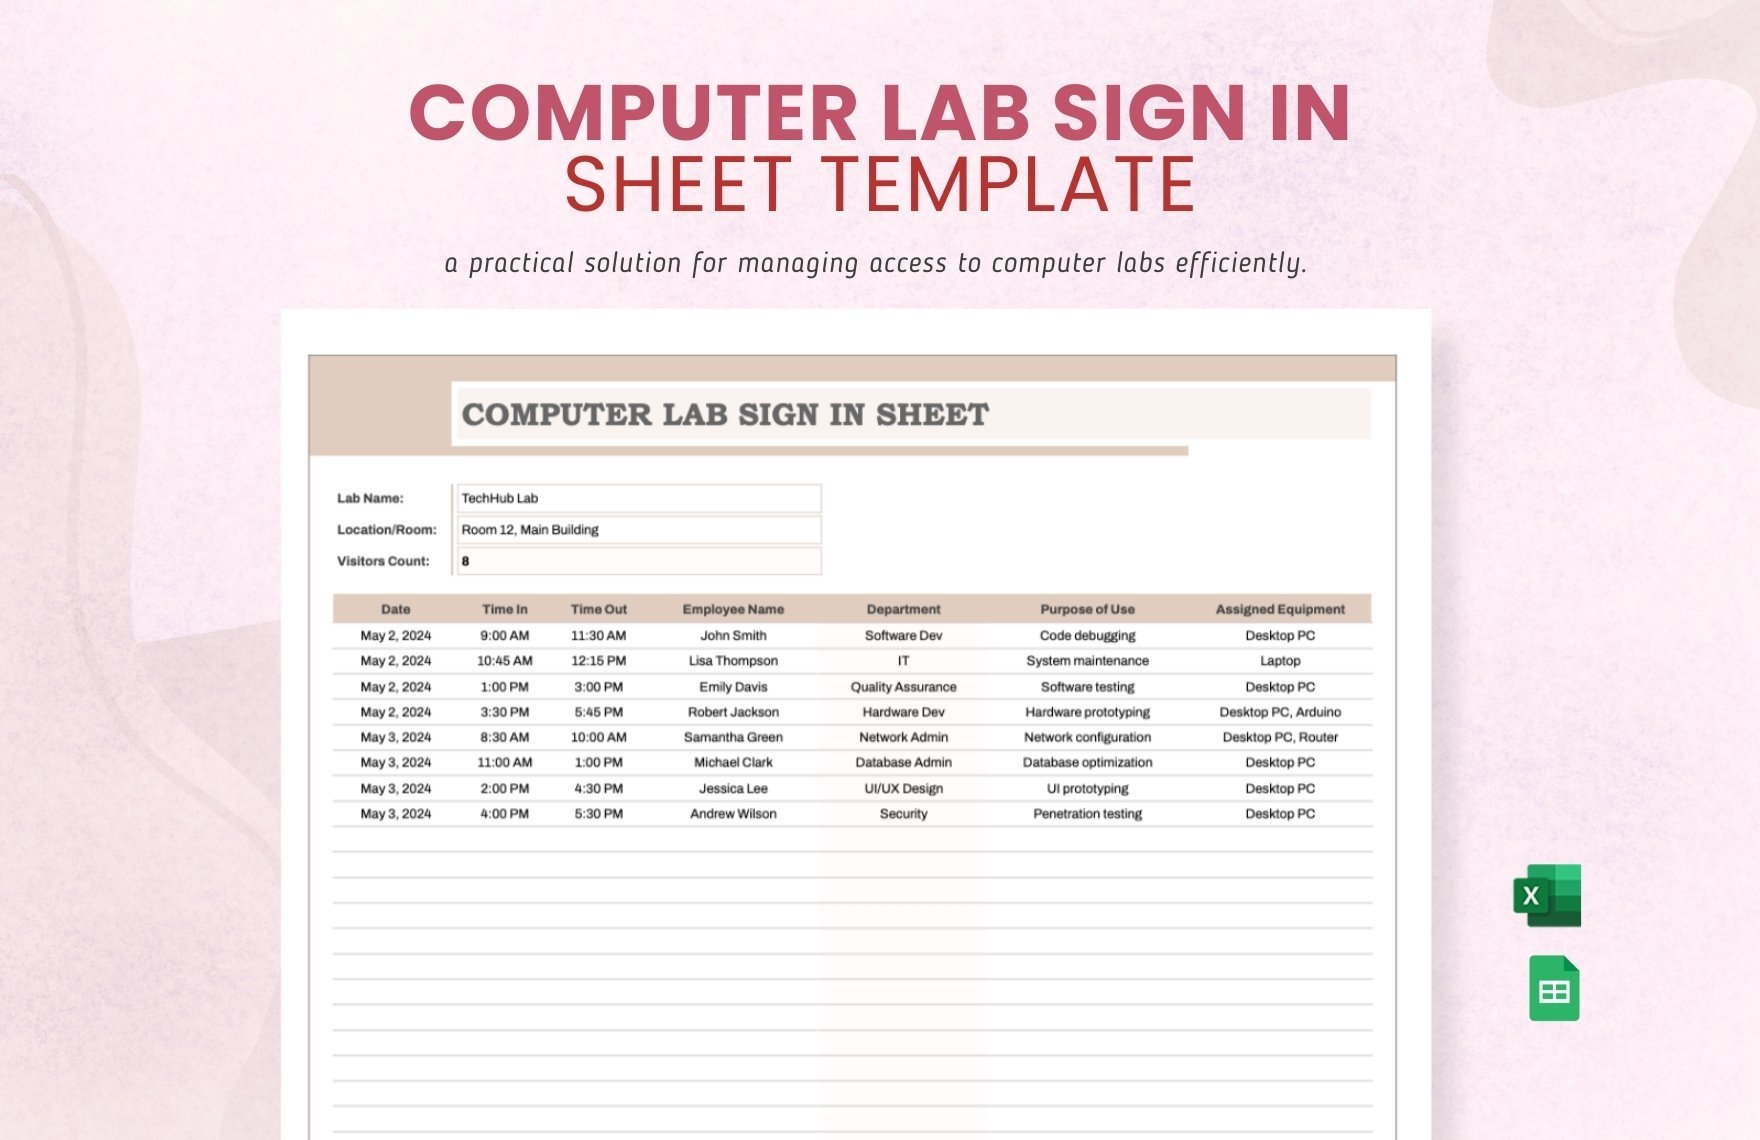 Computer Lab Sign in Sheet Template